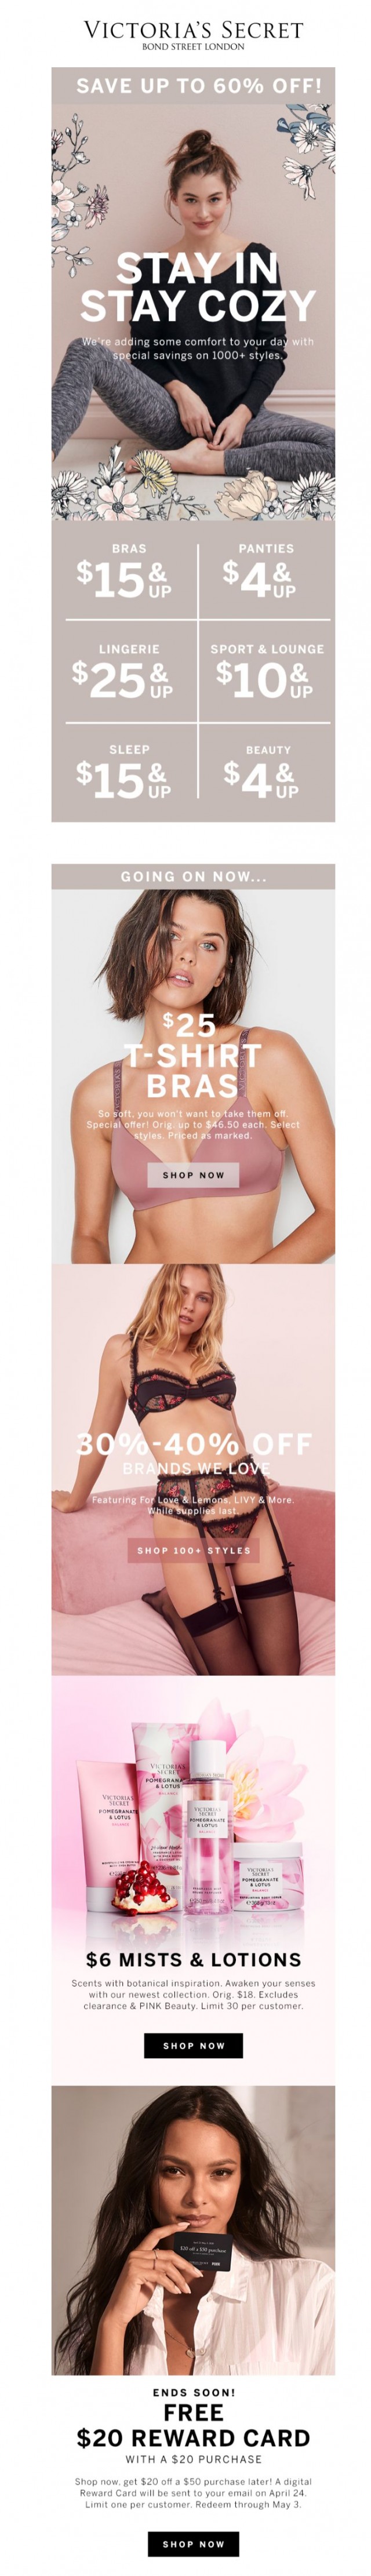 Coupon for: Victoria's Secret - Stay cozy & get up to 60% OFF